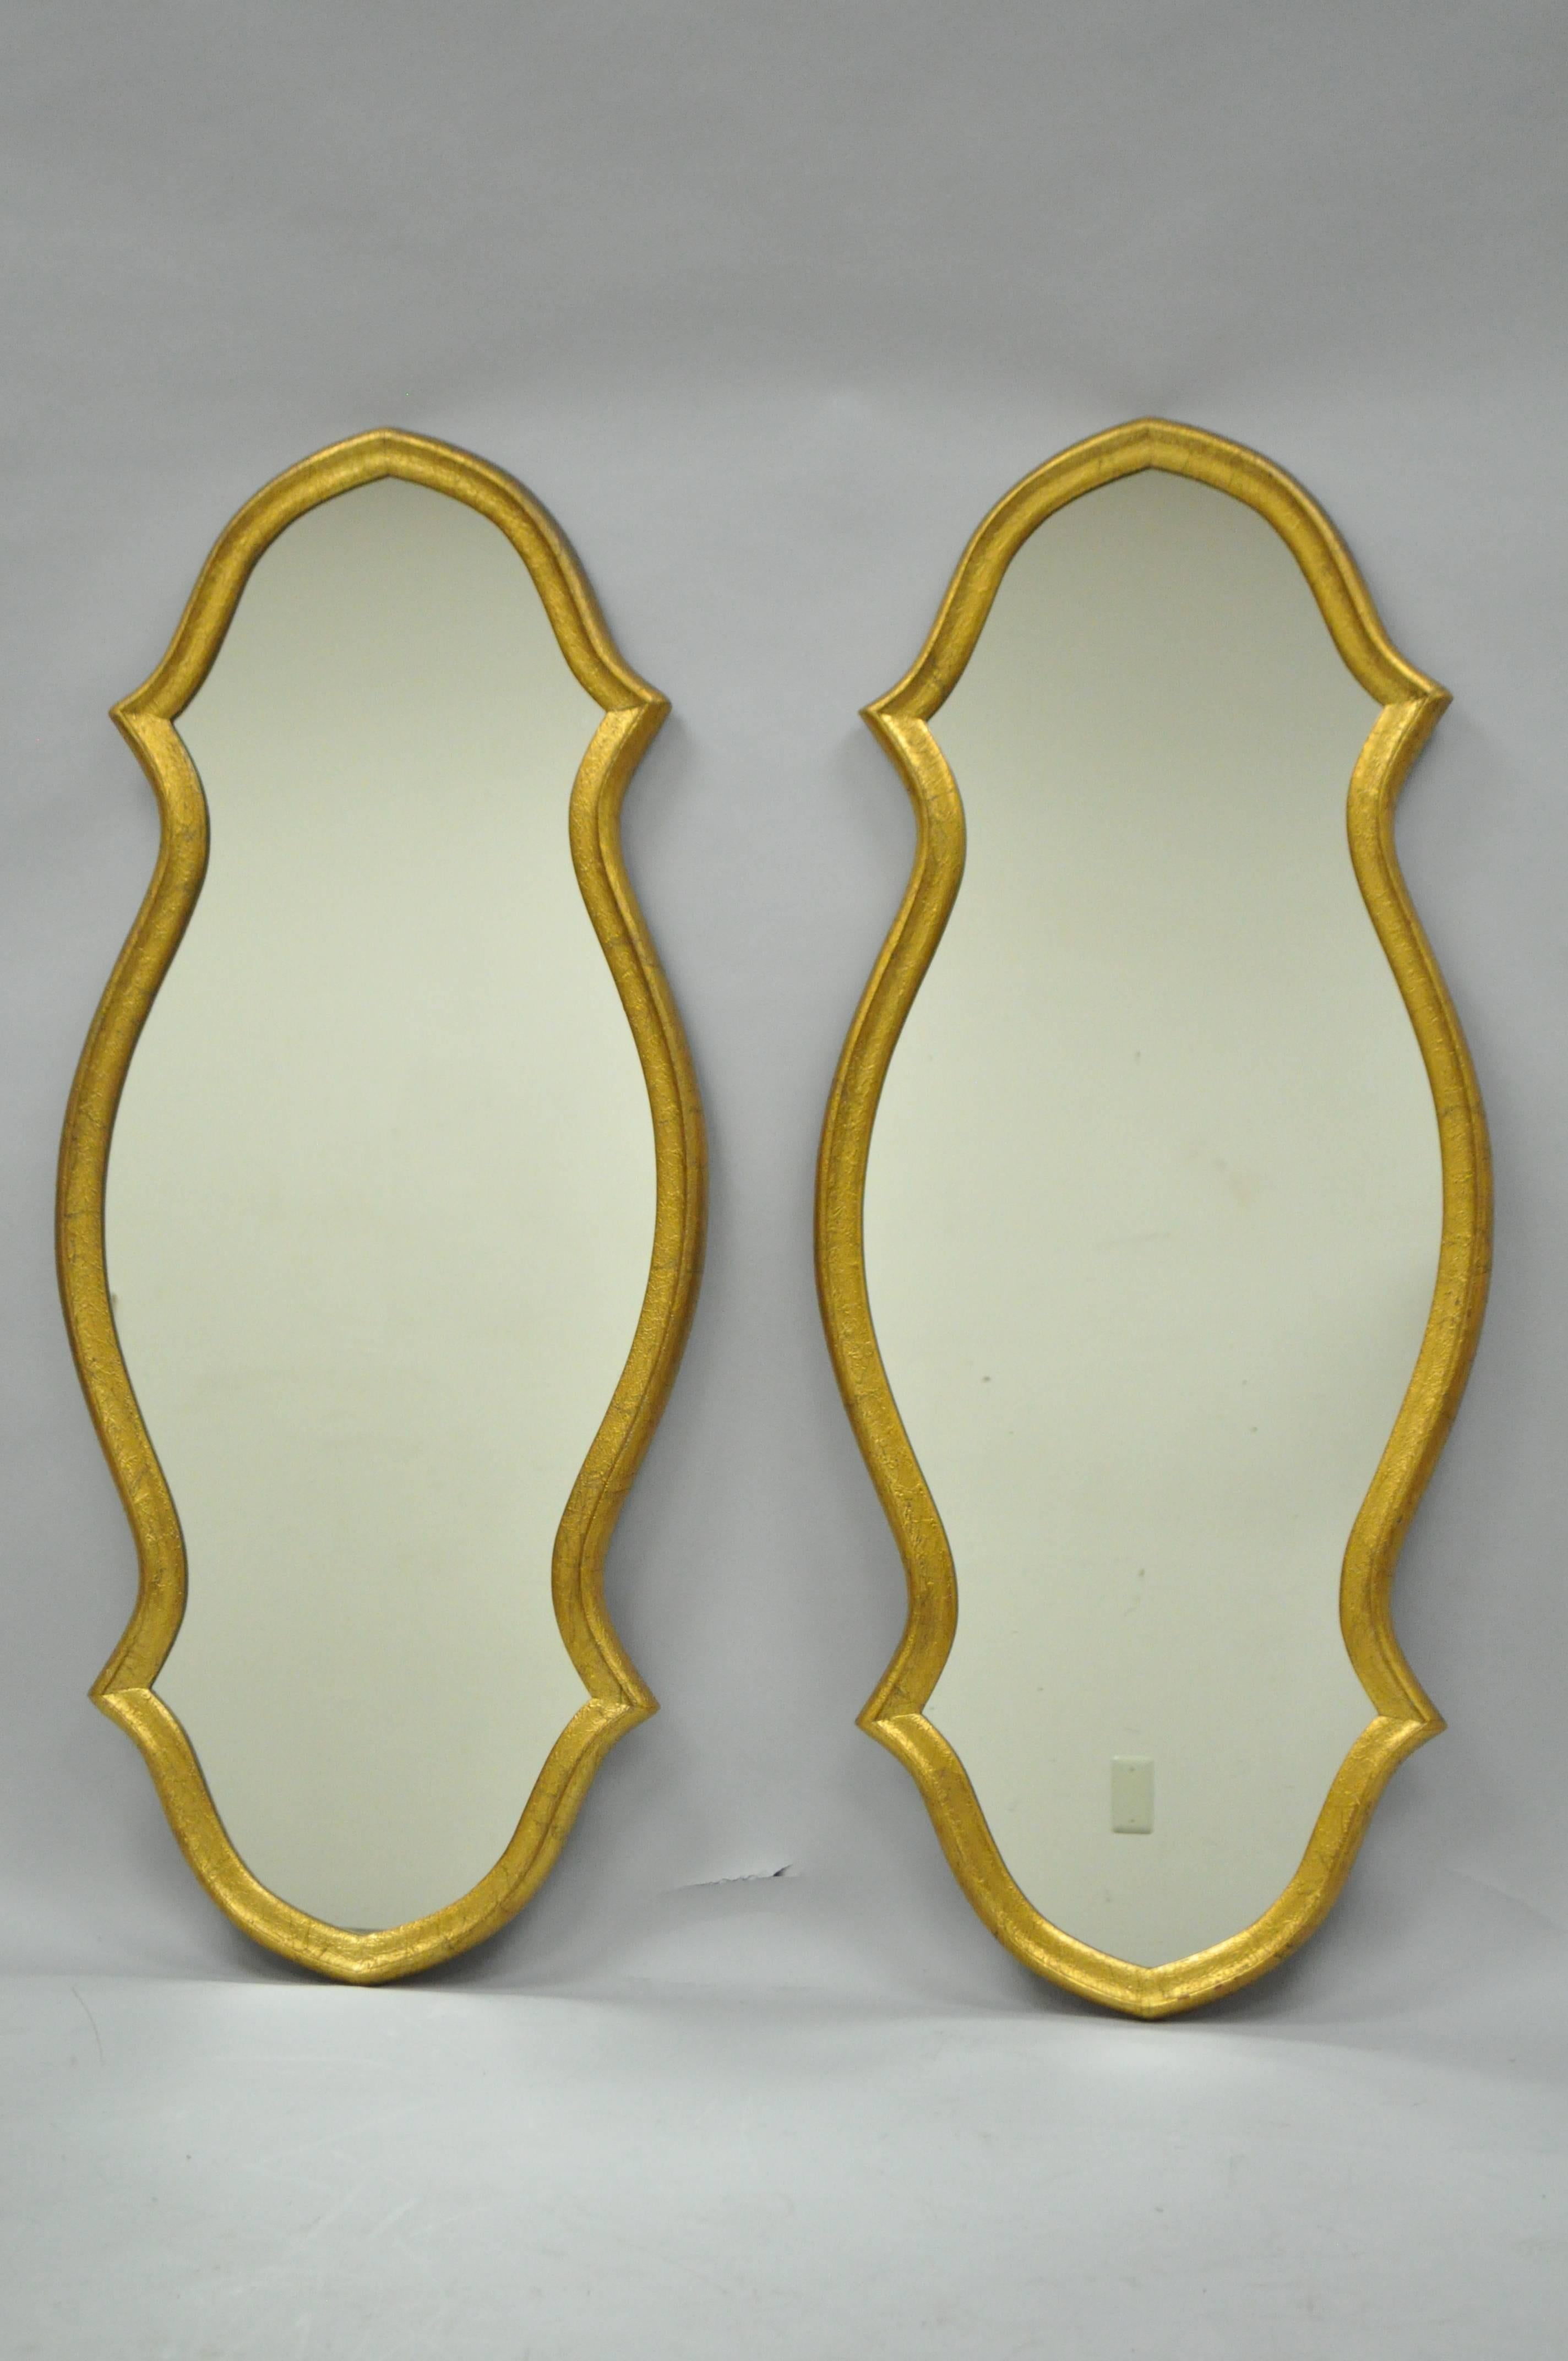 Pair of Vintage Carved Wood Hollywood Regency Gold Keyhole Frame Wall Mirrors 4